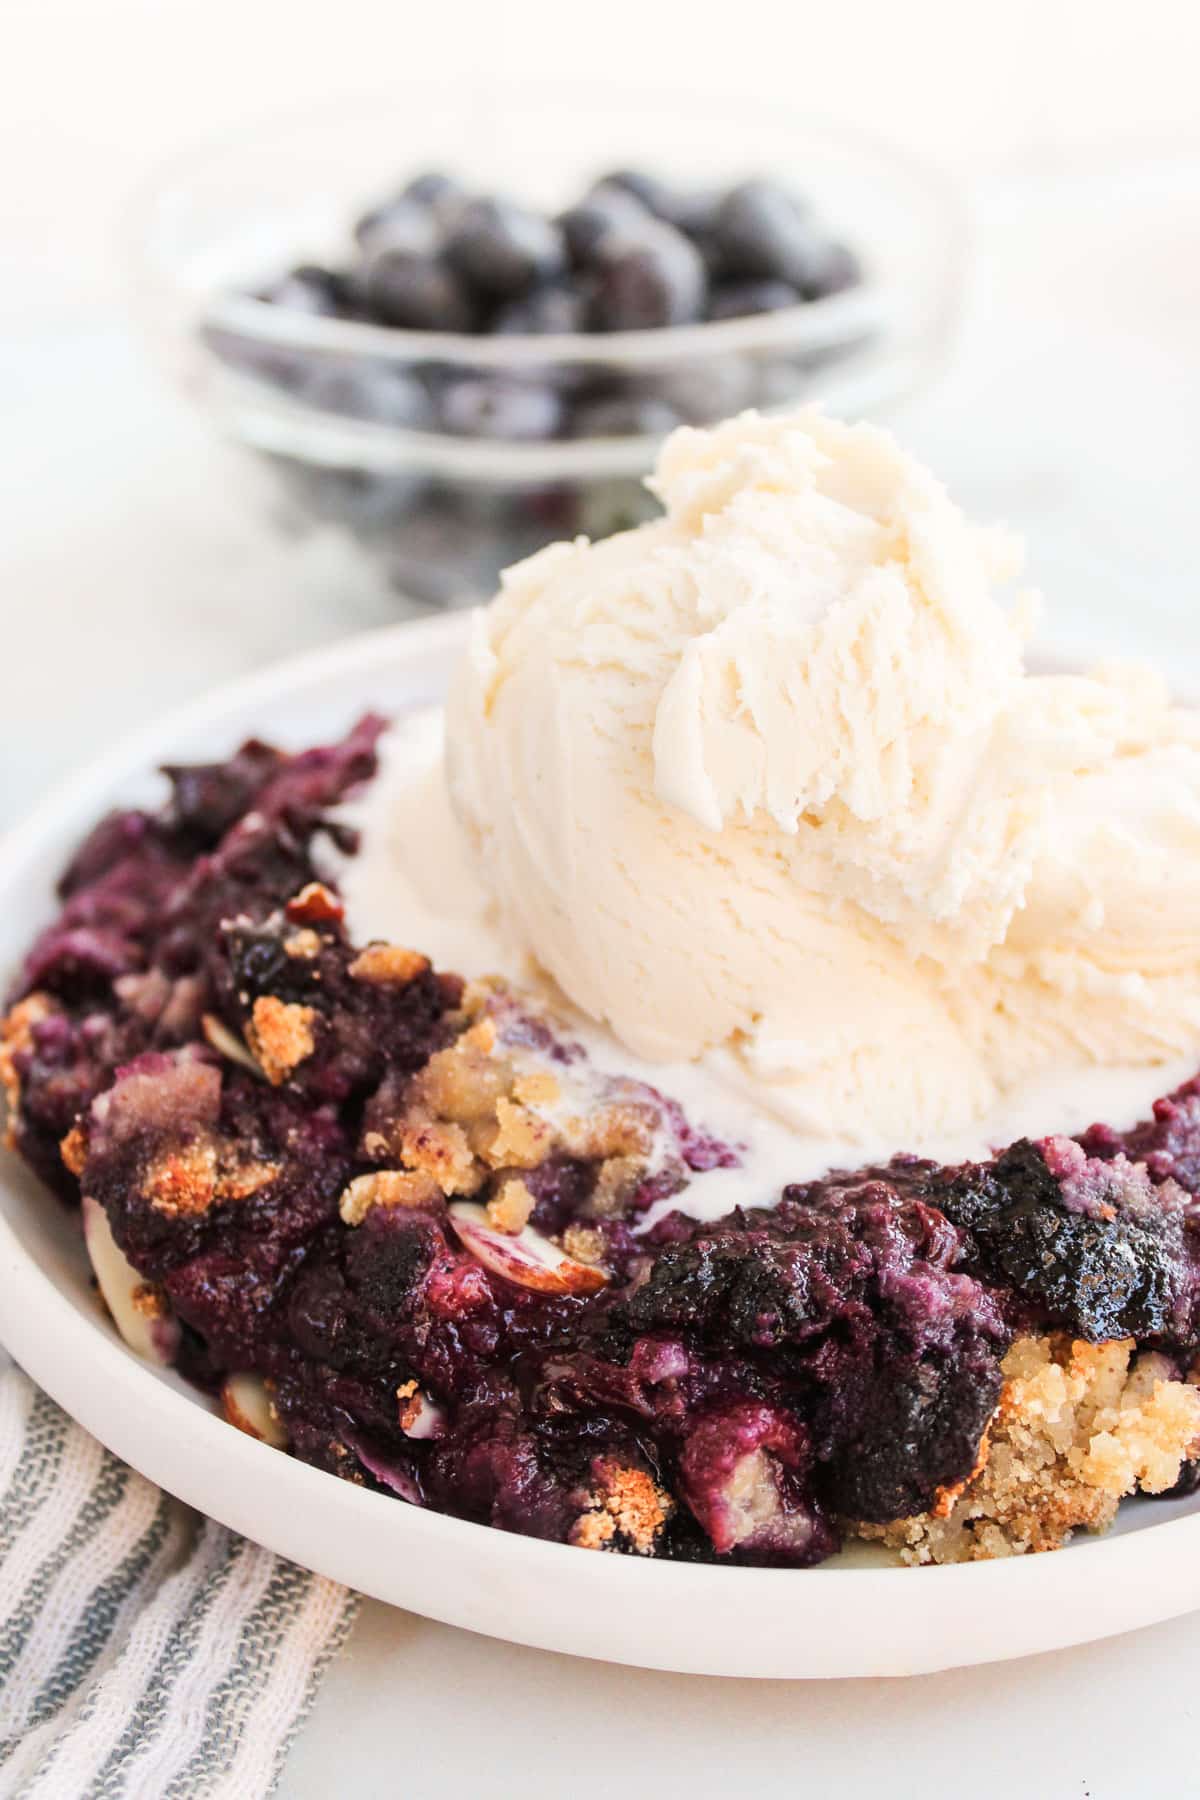 Skillet Blueberry Almond Cobbler - The Whole Cook